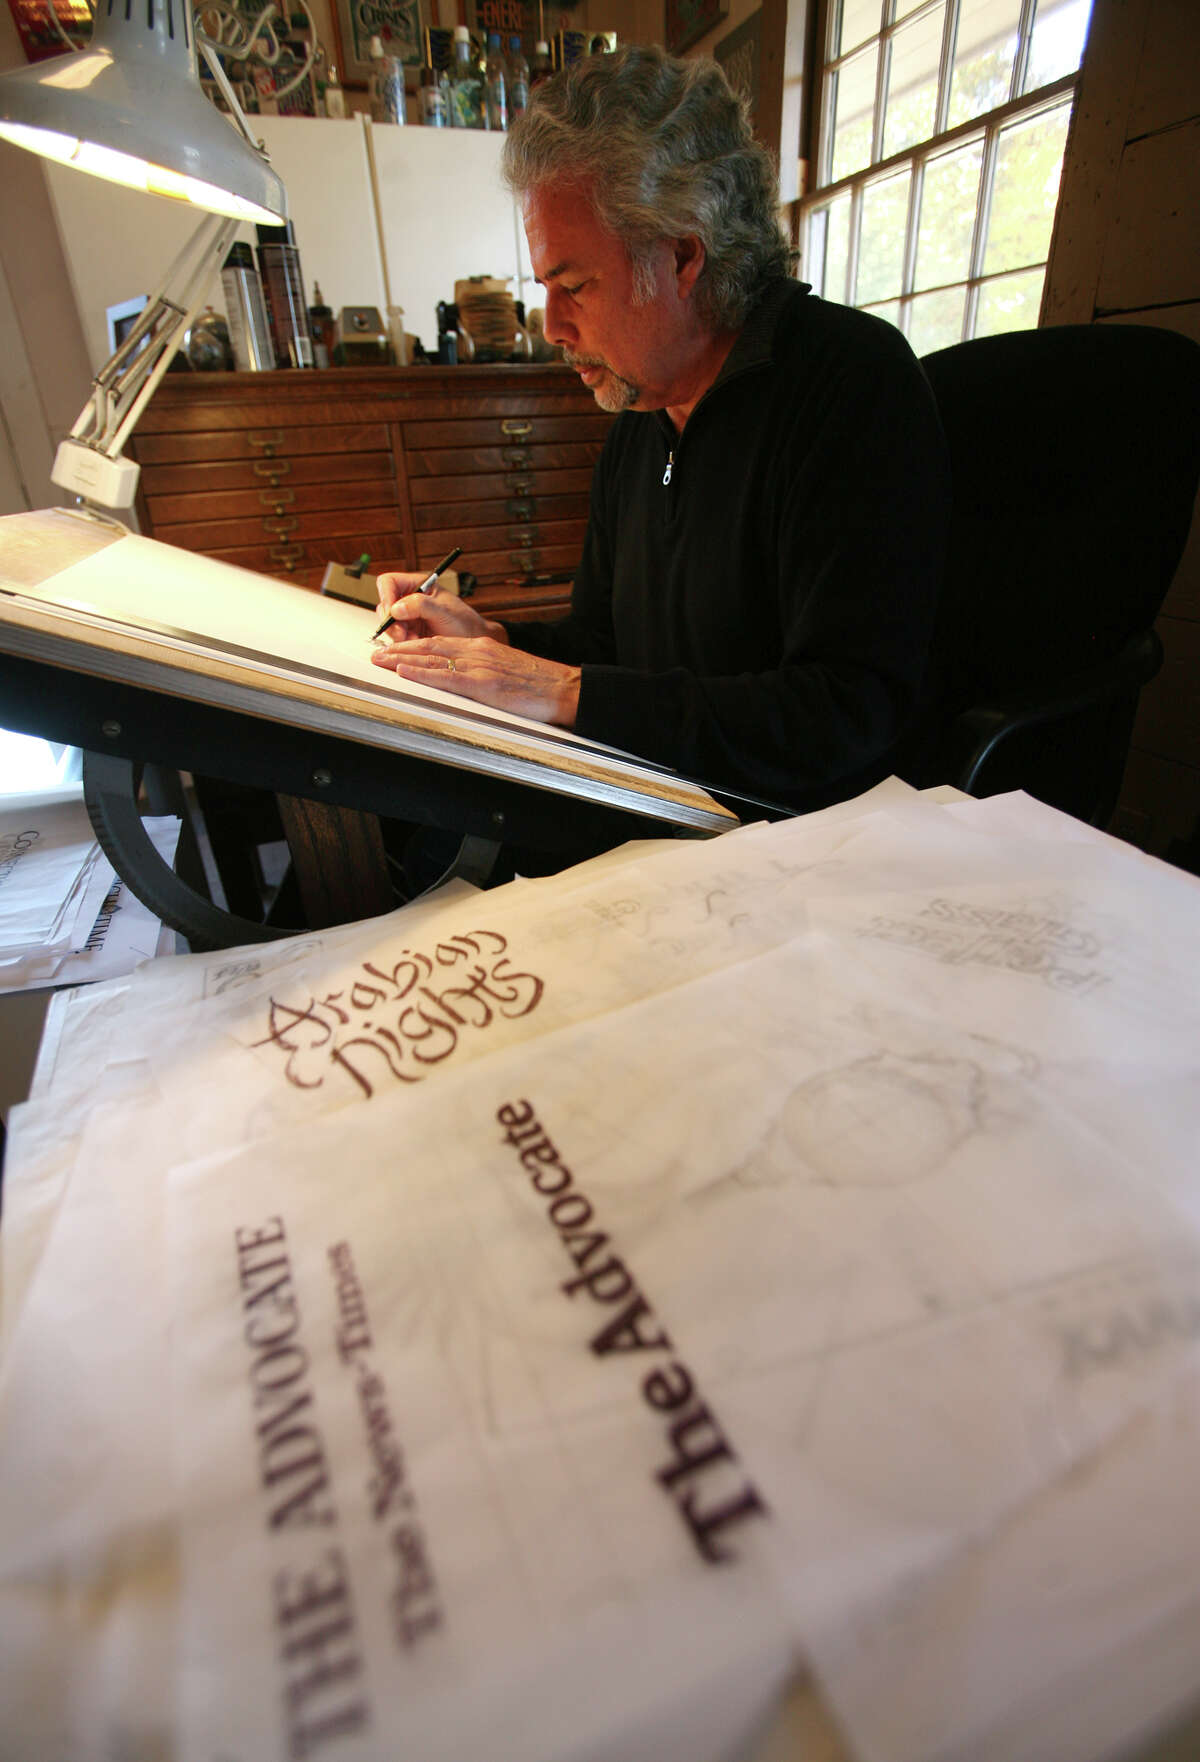 Gerard Huerta, creator of the new masthead designs for Hearst Connecticut Newspapers, works in his studio in the Southport section of Fairfield.